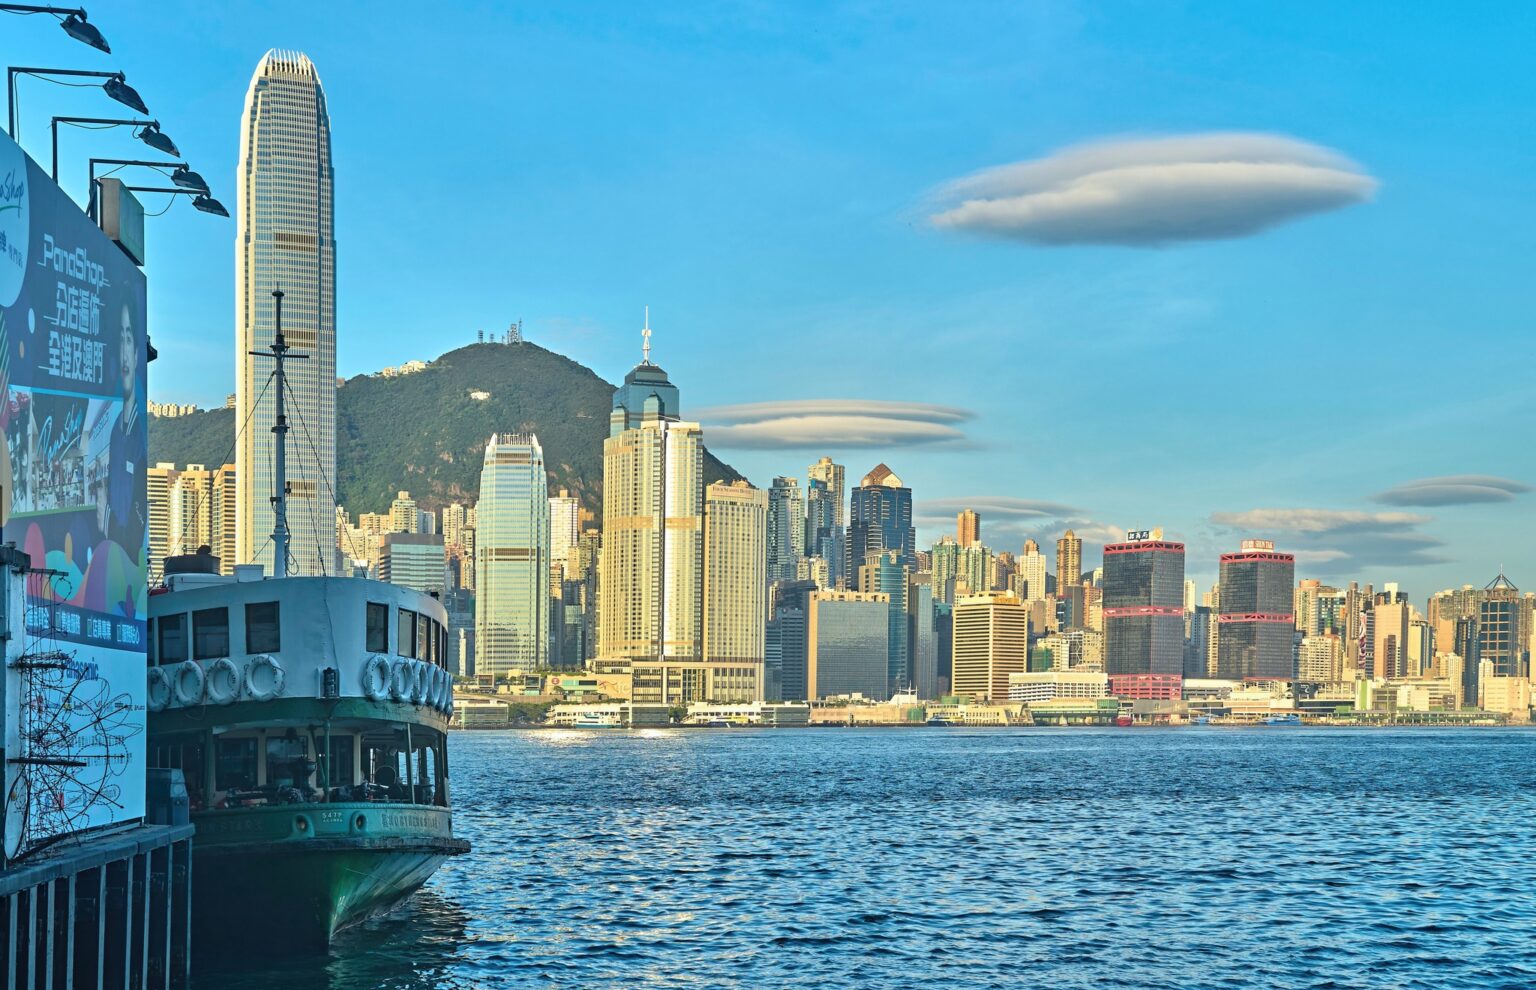 A view of flying saucer clouds seen over Victoria Harbour as seen from the Star Ferry Pier in Tsim Sha Tsui. The skyscrapers on Hong Kong Island can be see in the background.